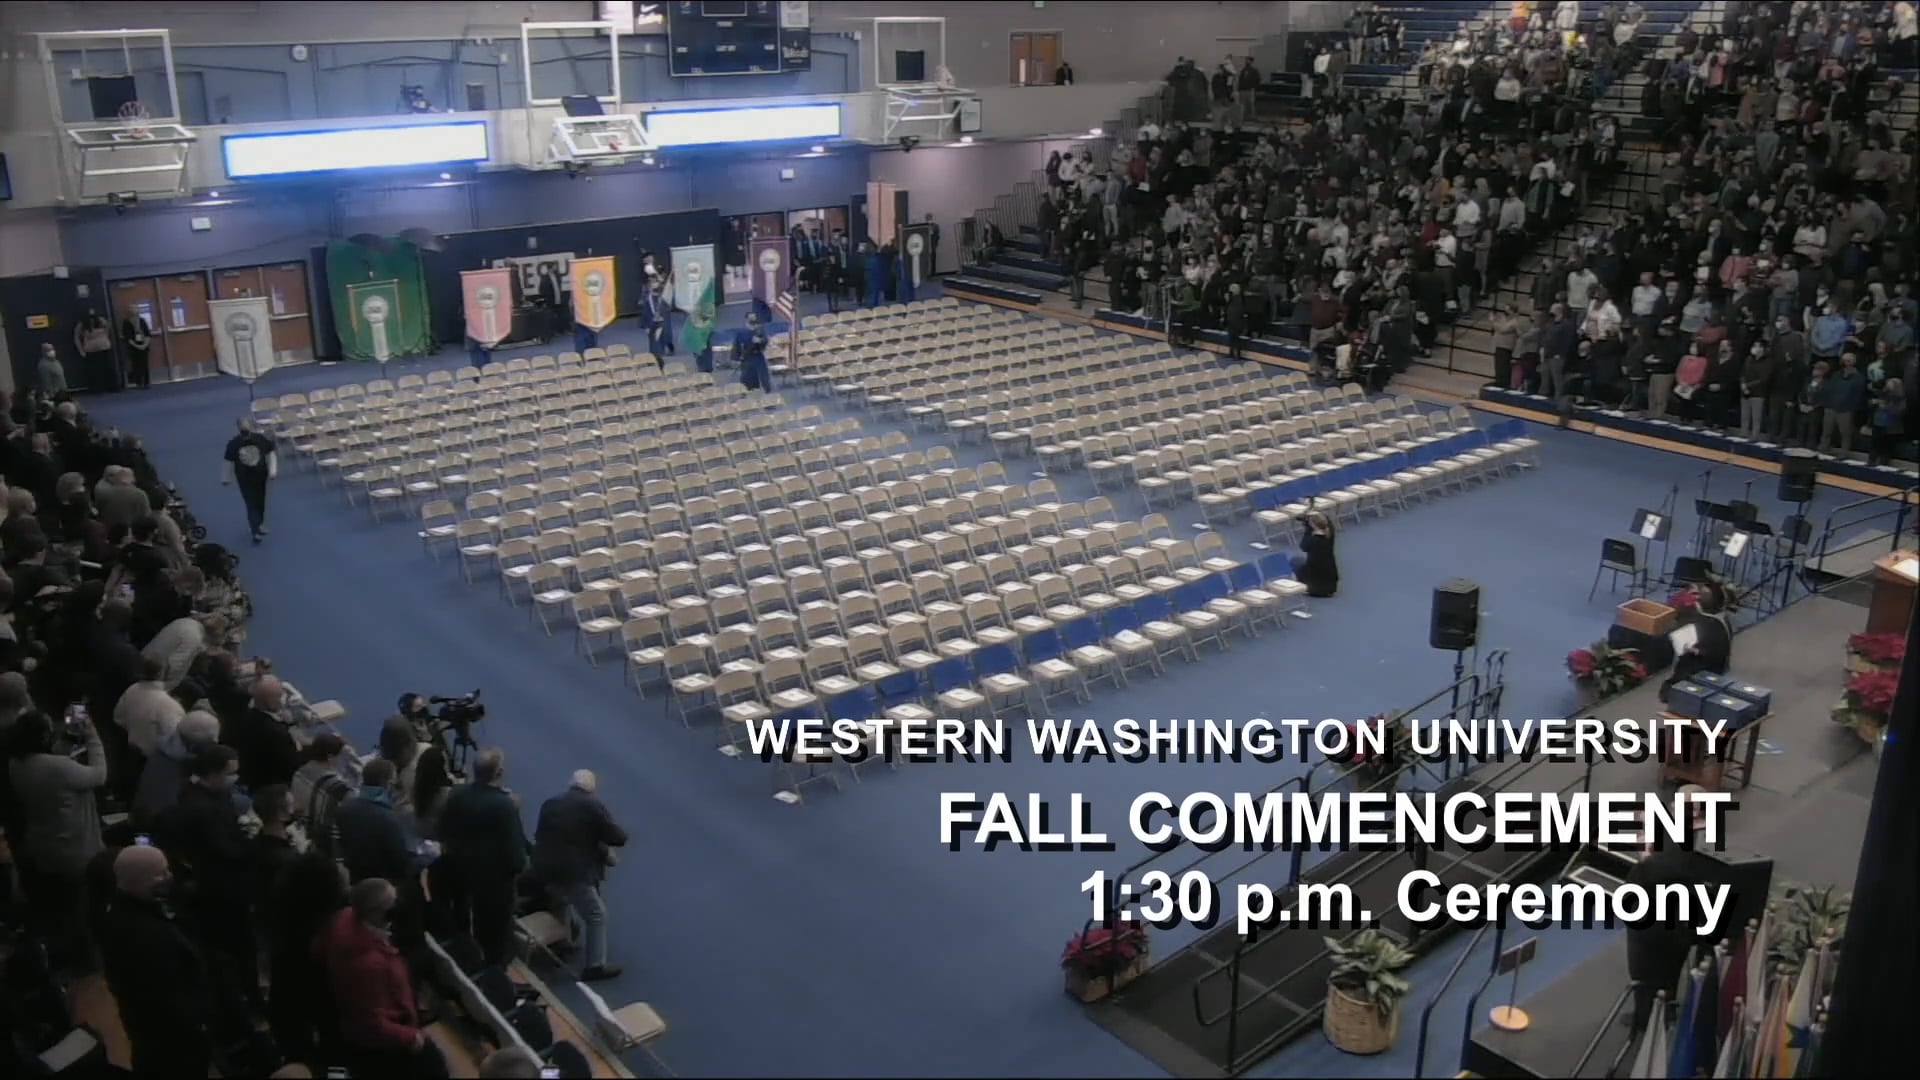 WWU Fall Commencement 130 p.m. 12/11/21 on Vimeo